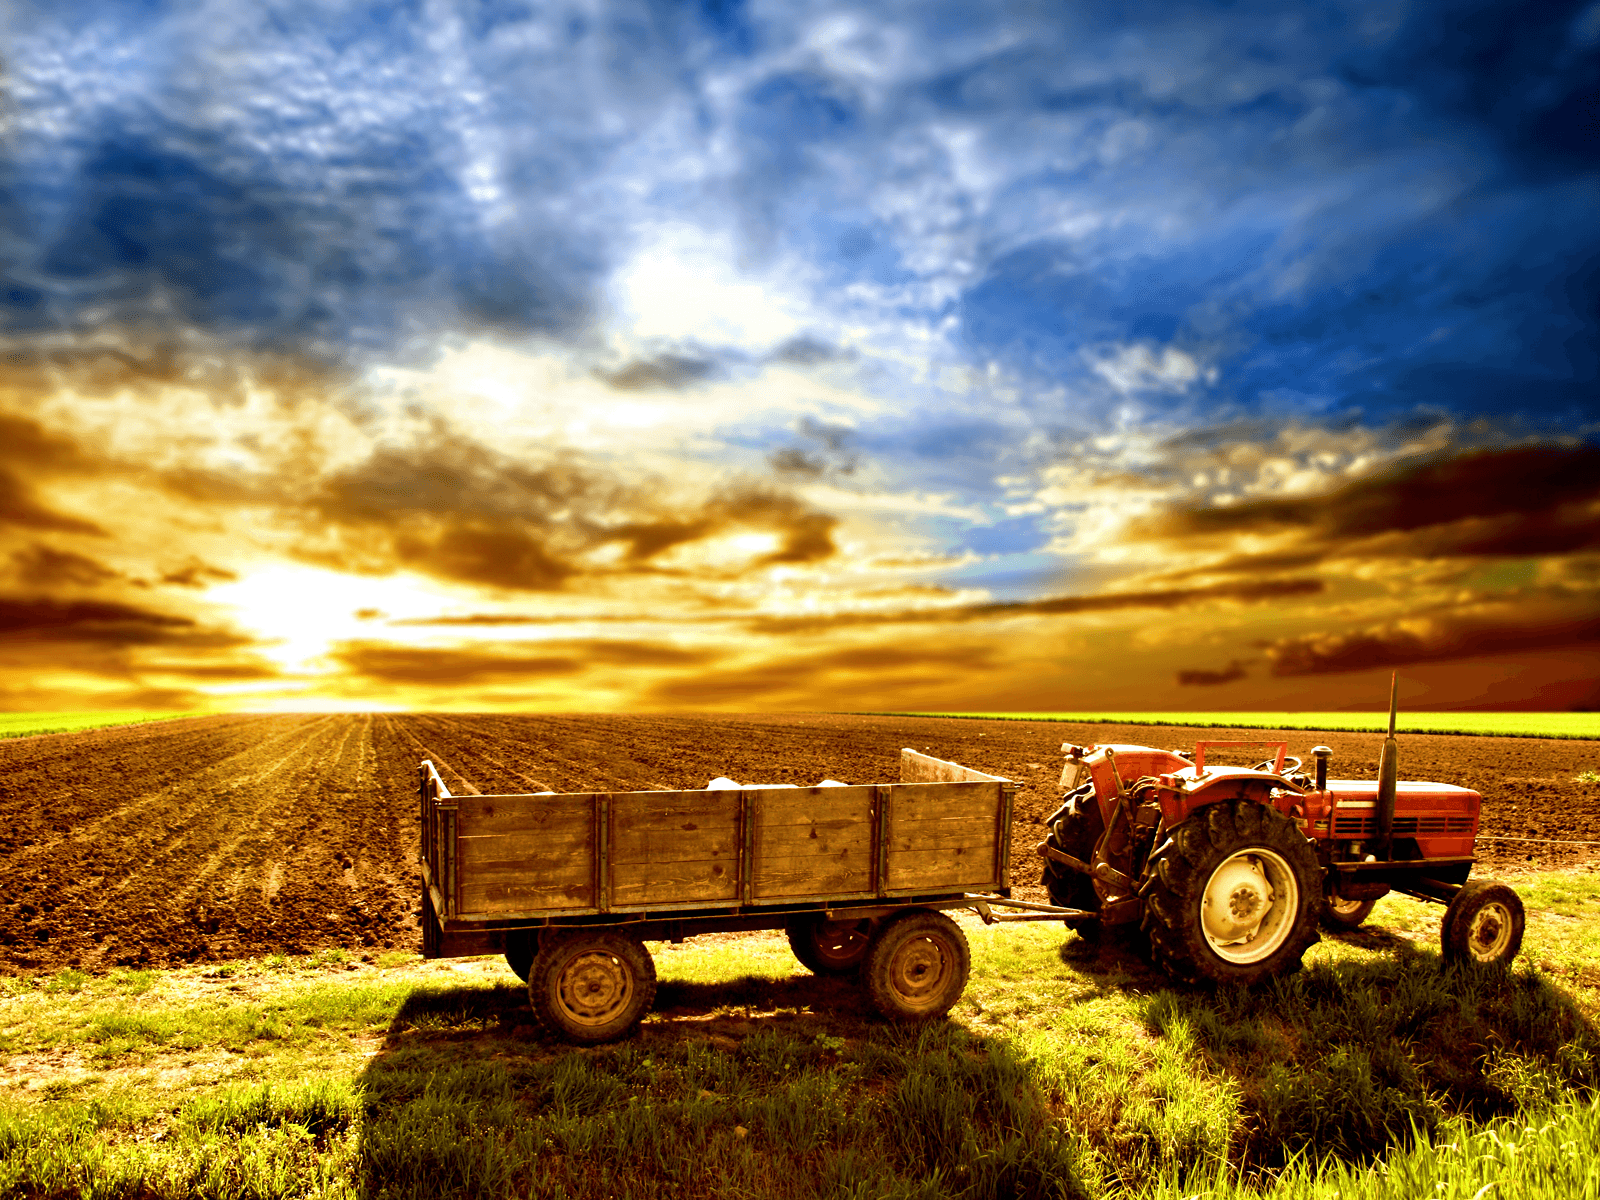 70 Farm wallpapers HD  Download Free backgrounds